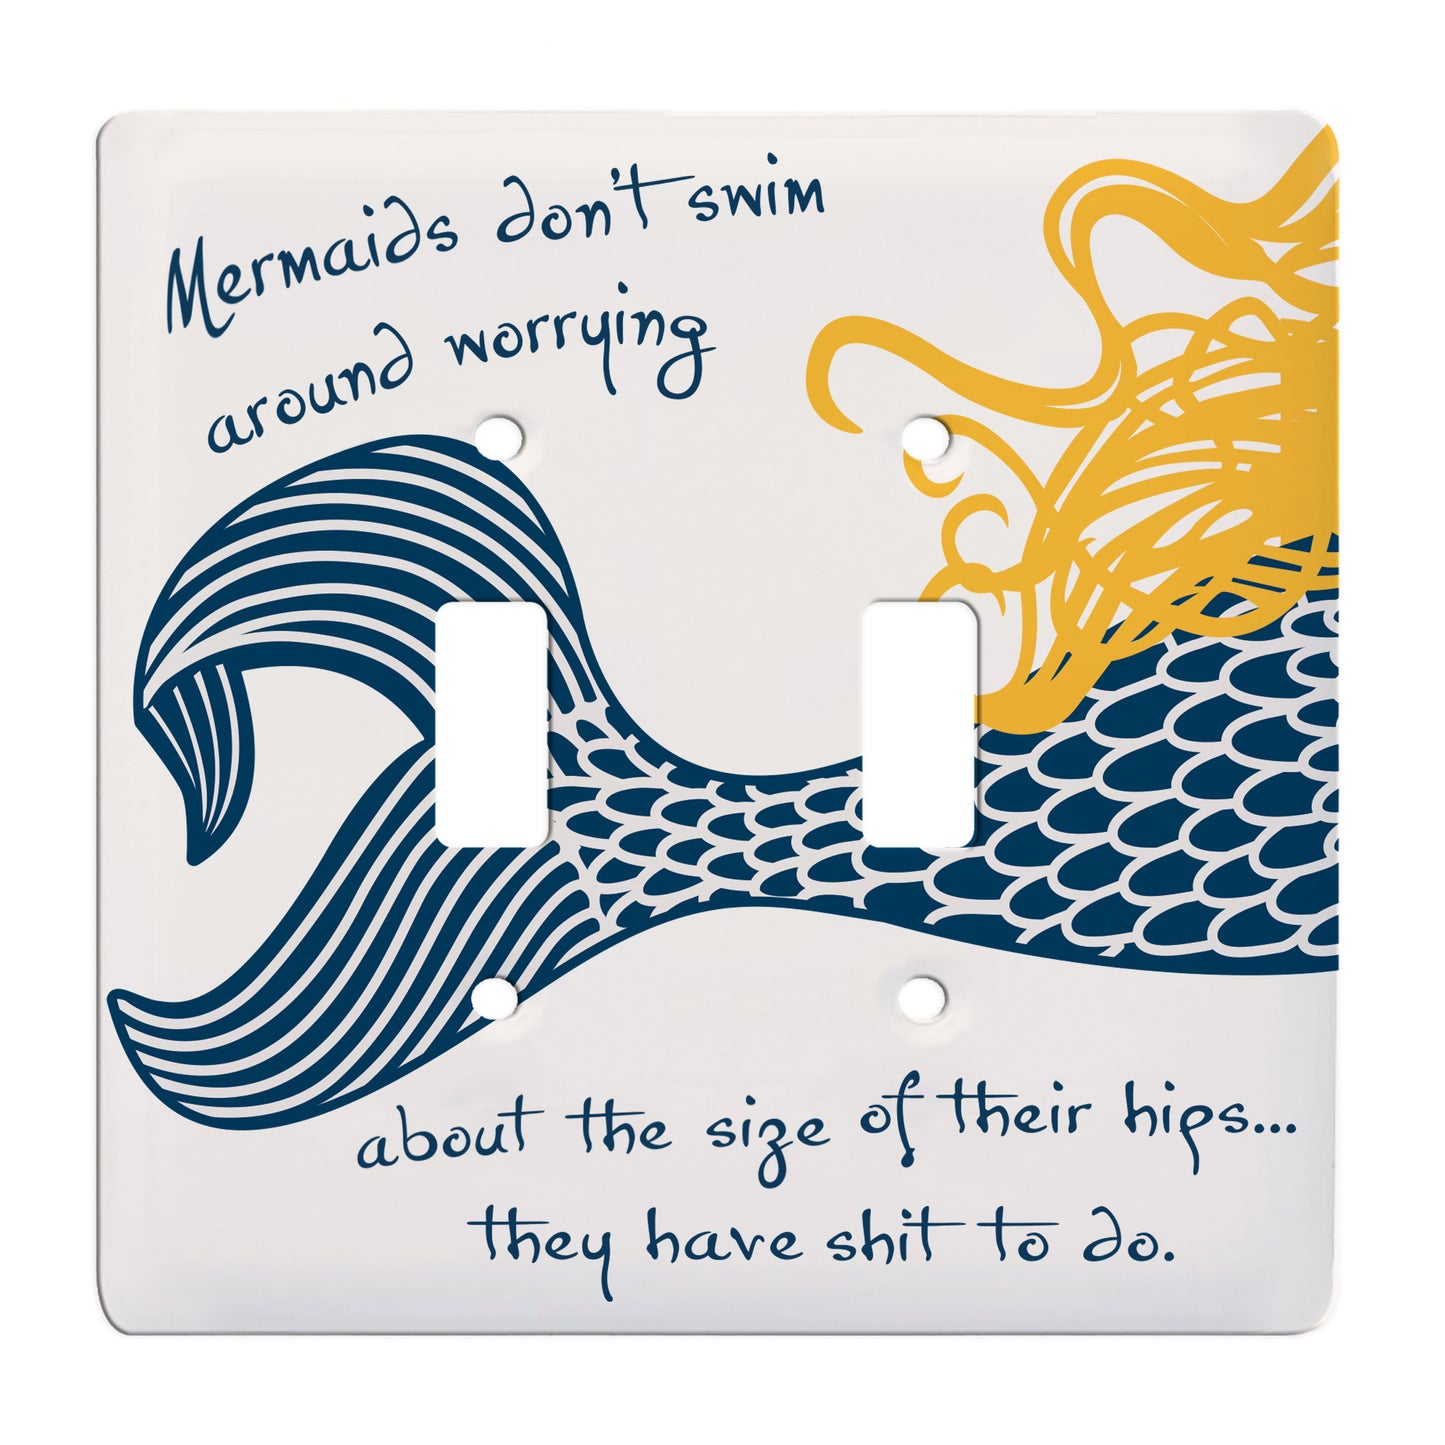 white ceramic double toggle switch plate featuring the blue tail of a mermaid as well as blonde flowing hair. The switch plate features blue text stating "Mermaids don't swim around worry about the size of their hips...they have shit to do."